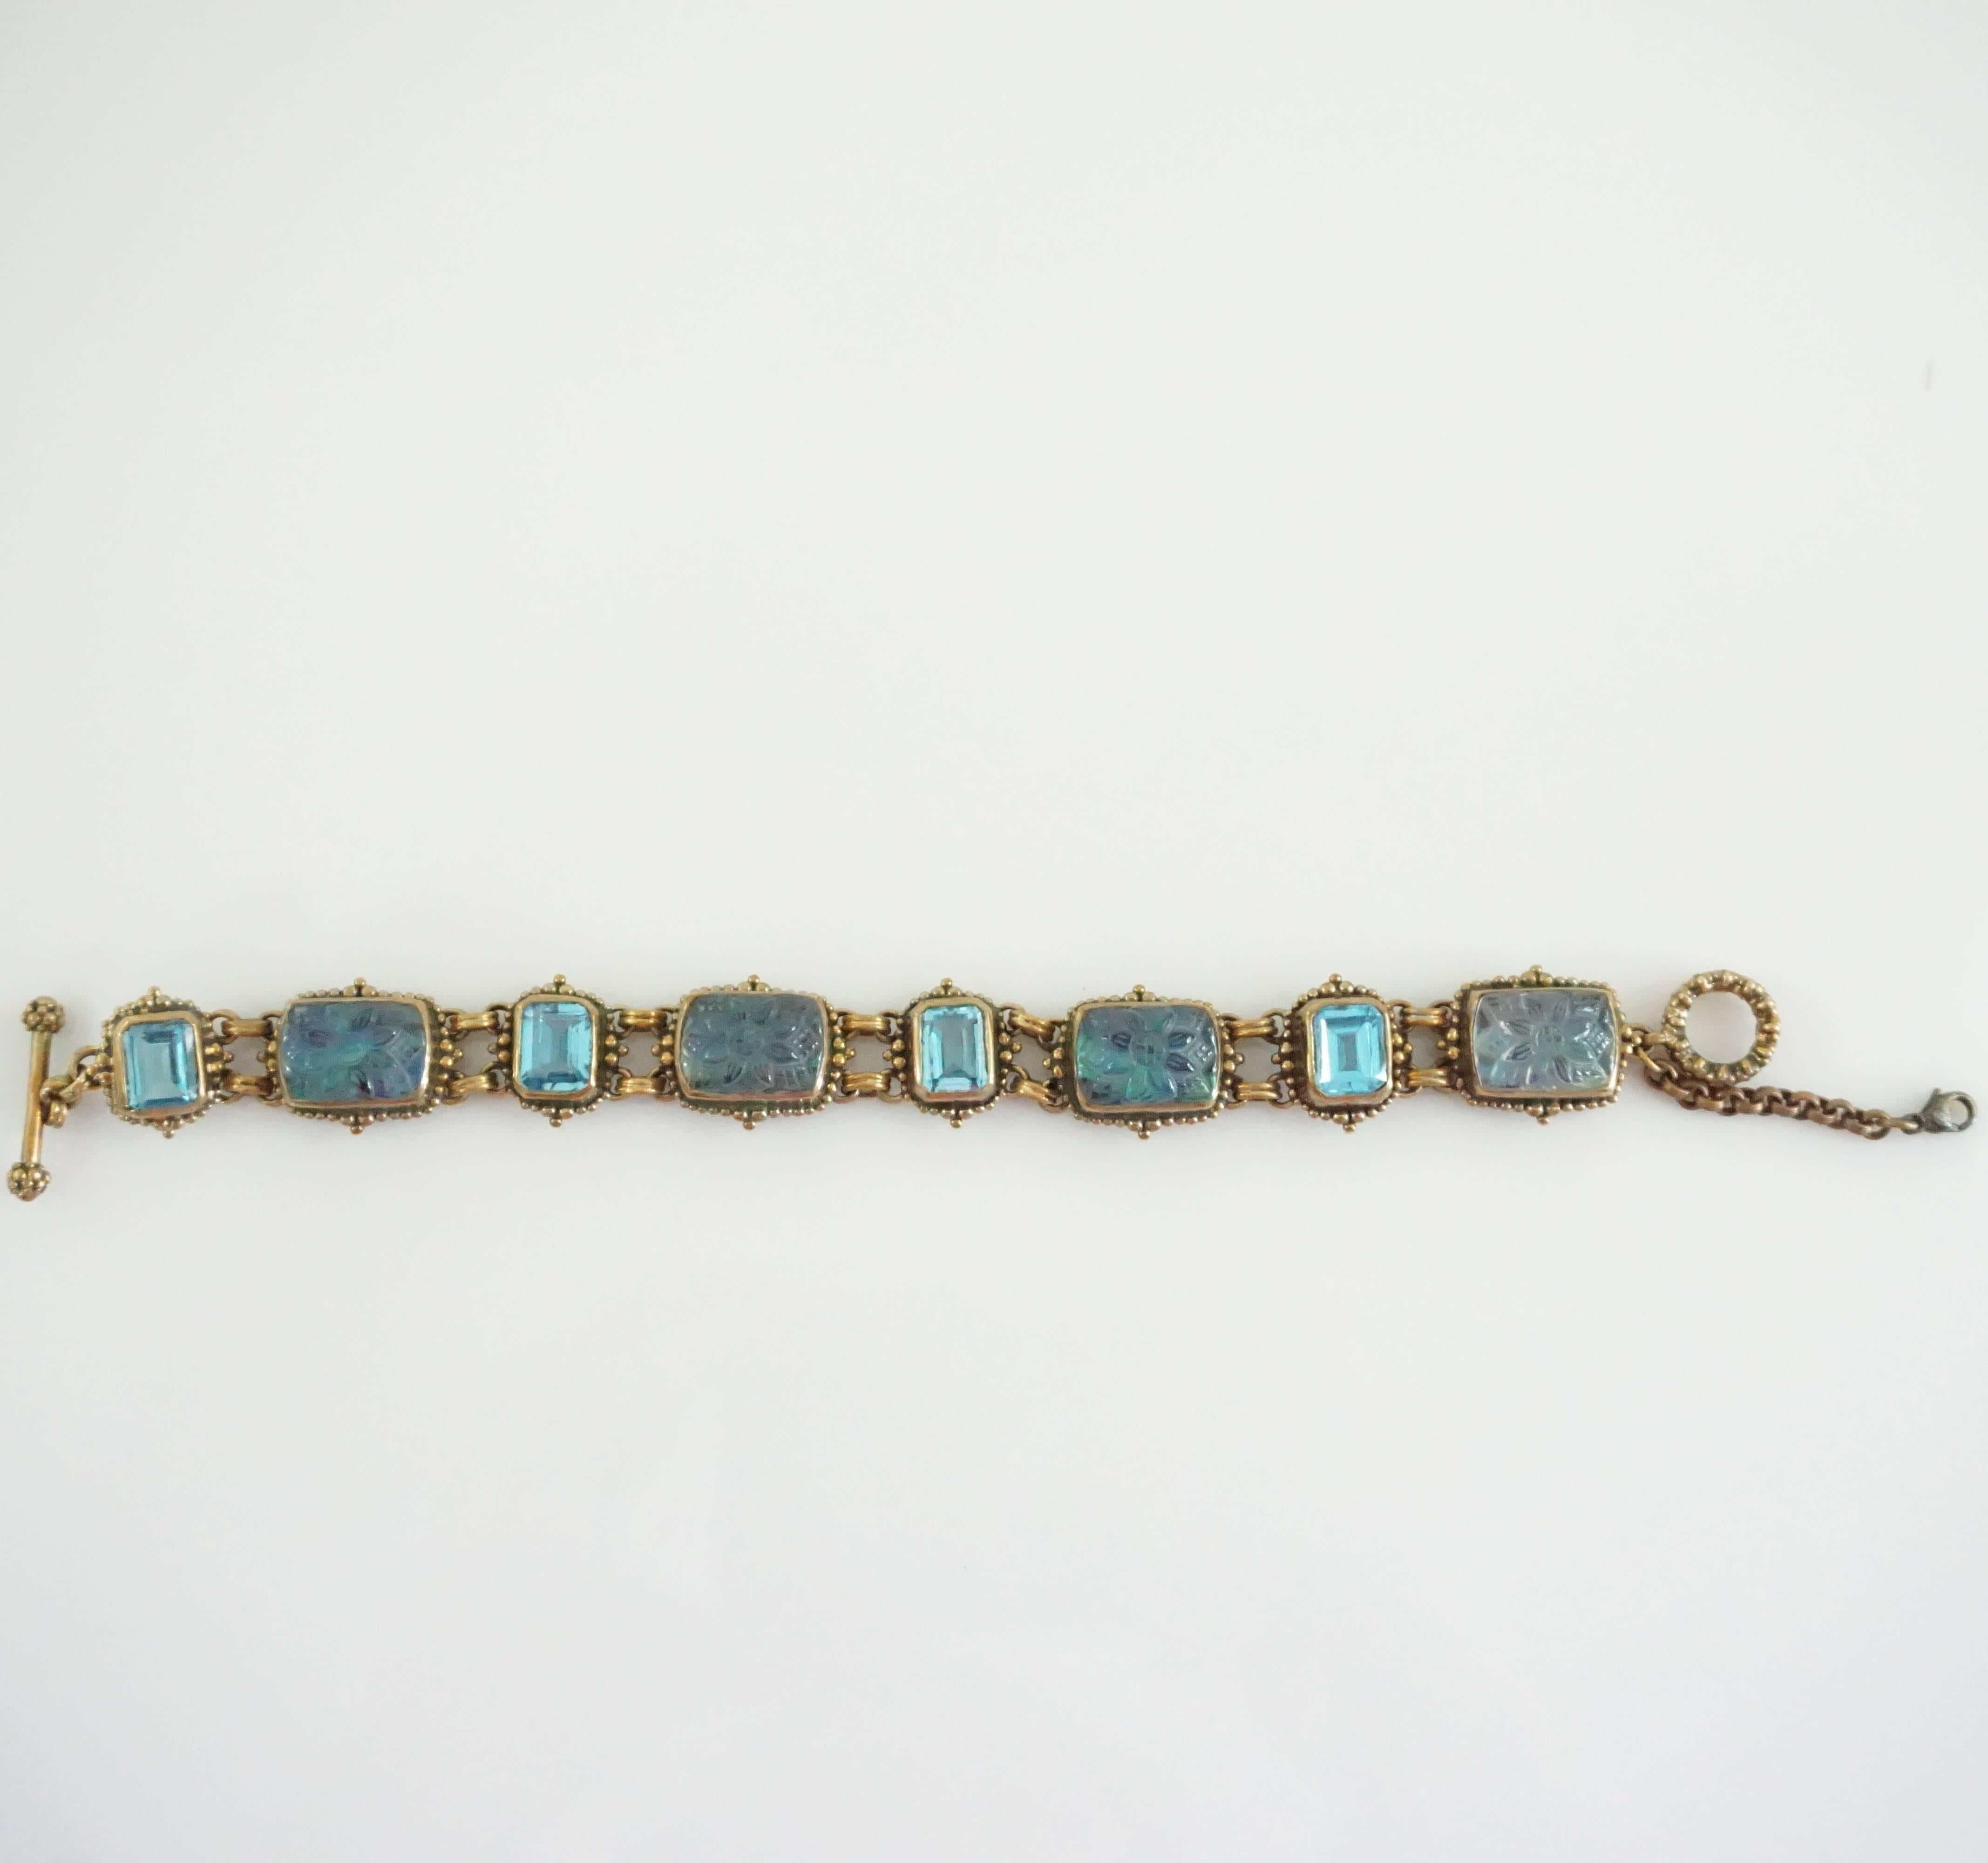 This beautiful Stephen Dweck bracelet from the 2001 collection has blue crystals in different shades of blue. The chain is bronze and textured with a toggle closure. This bracelet is in excellent condition and never has been